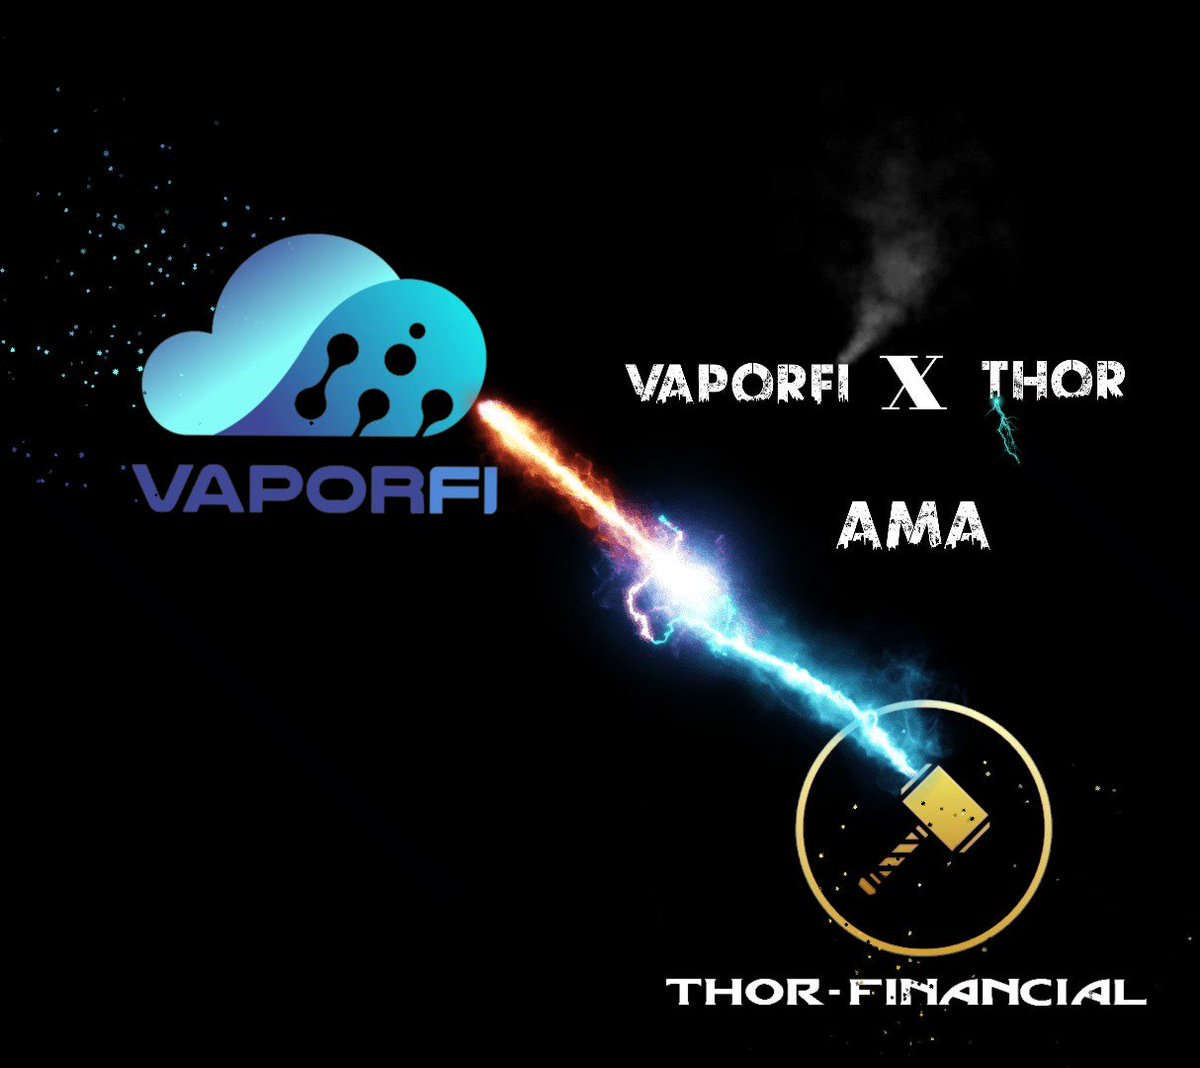 This Saturday at 8PM EST

@ThorNodes and @VaporNodes AMA on @TwitterSpaces 

Bring your friends and family, you’re not going to want to miss the fun!

$THOR 🤝 $VPND